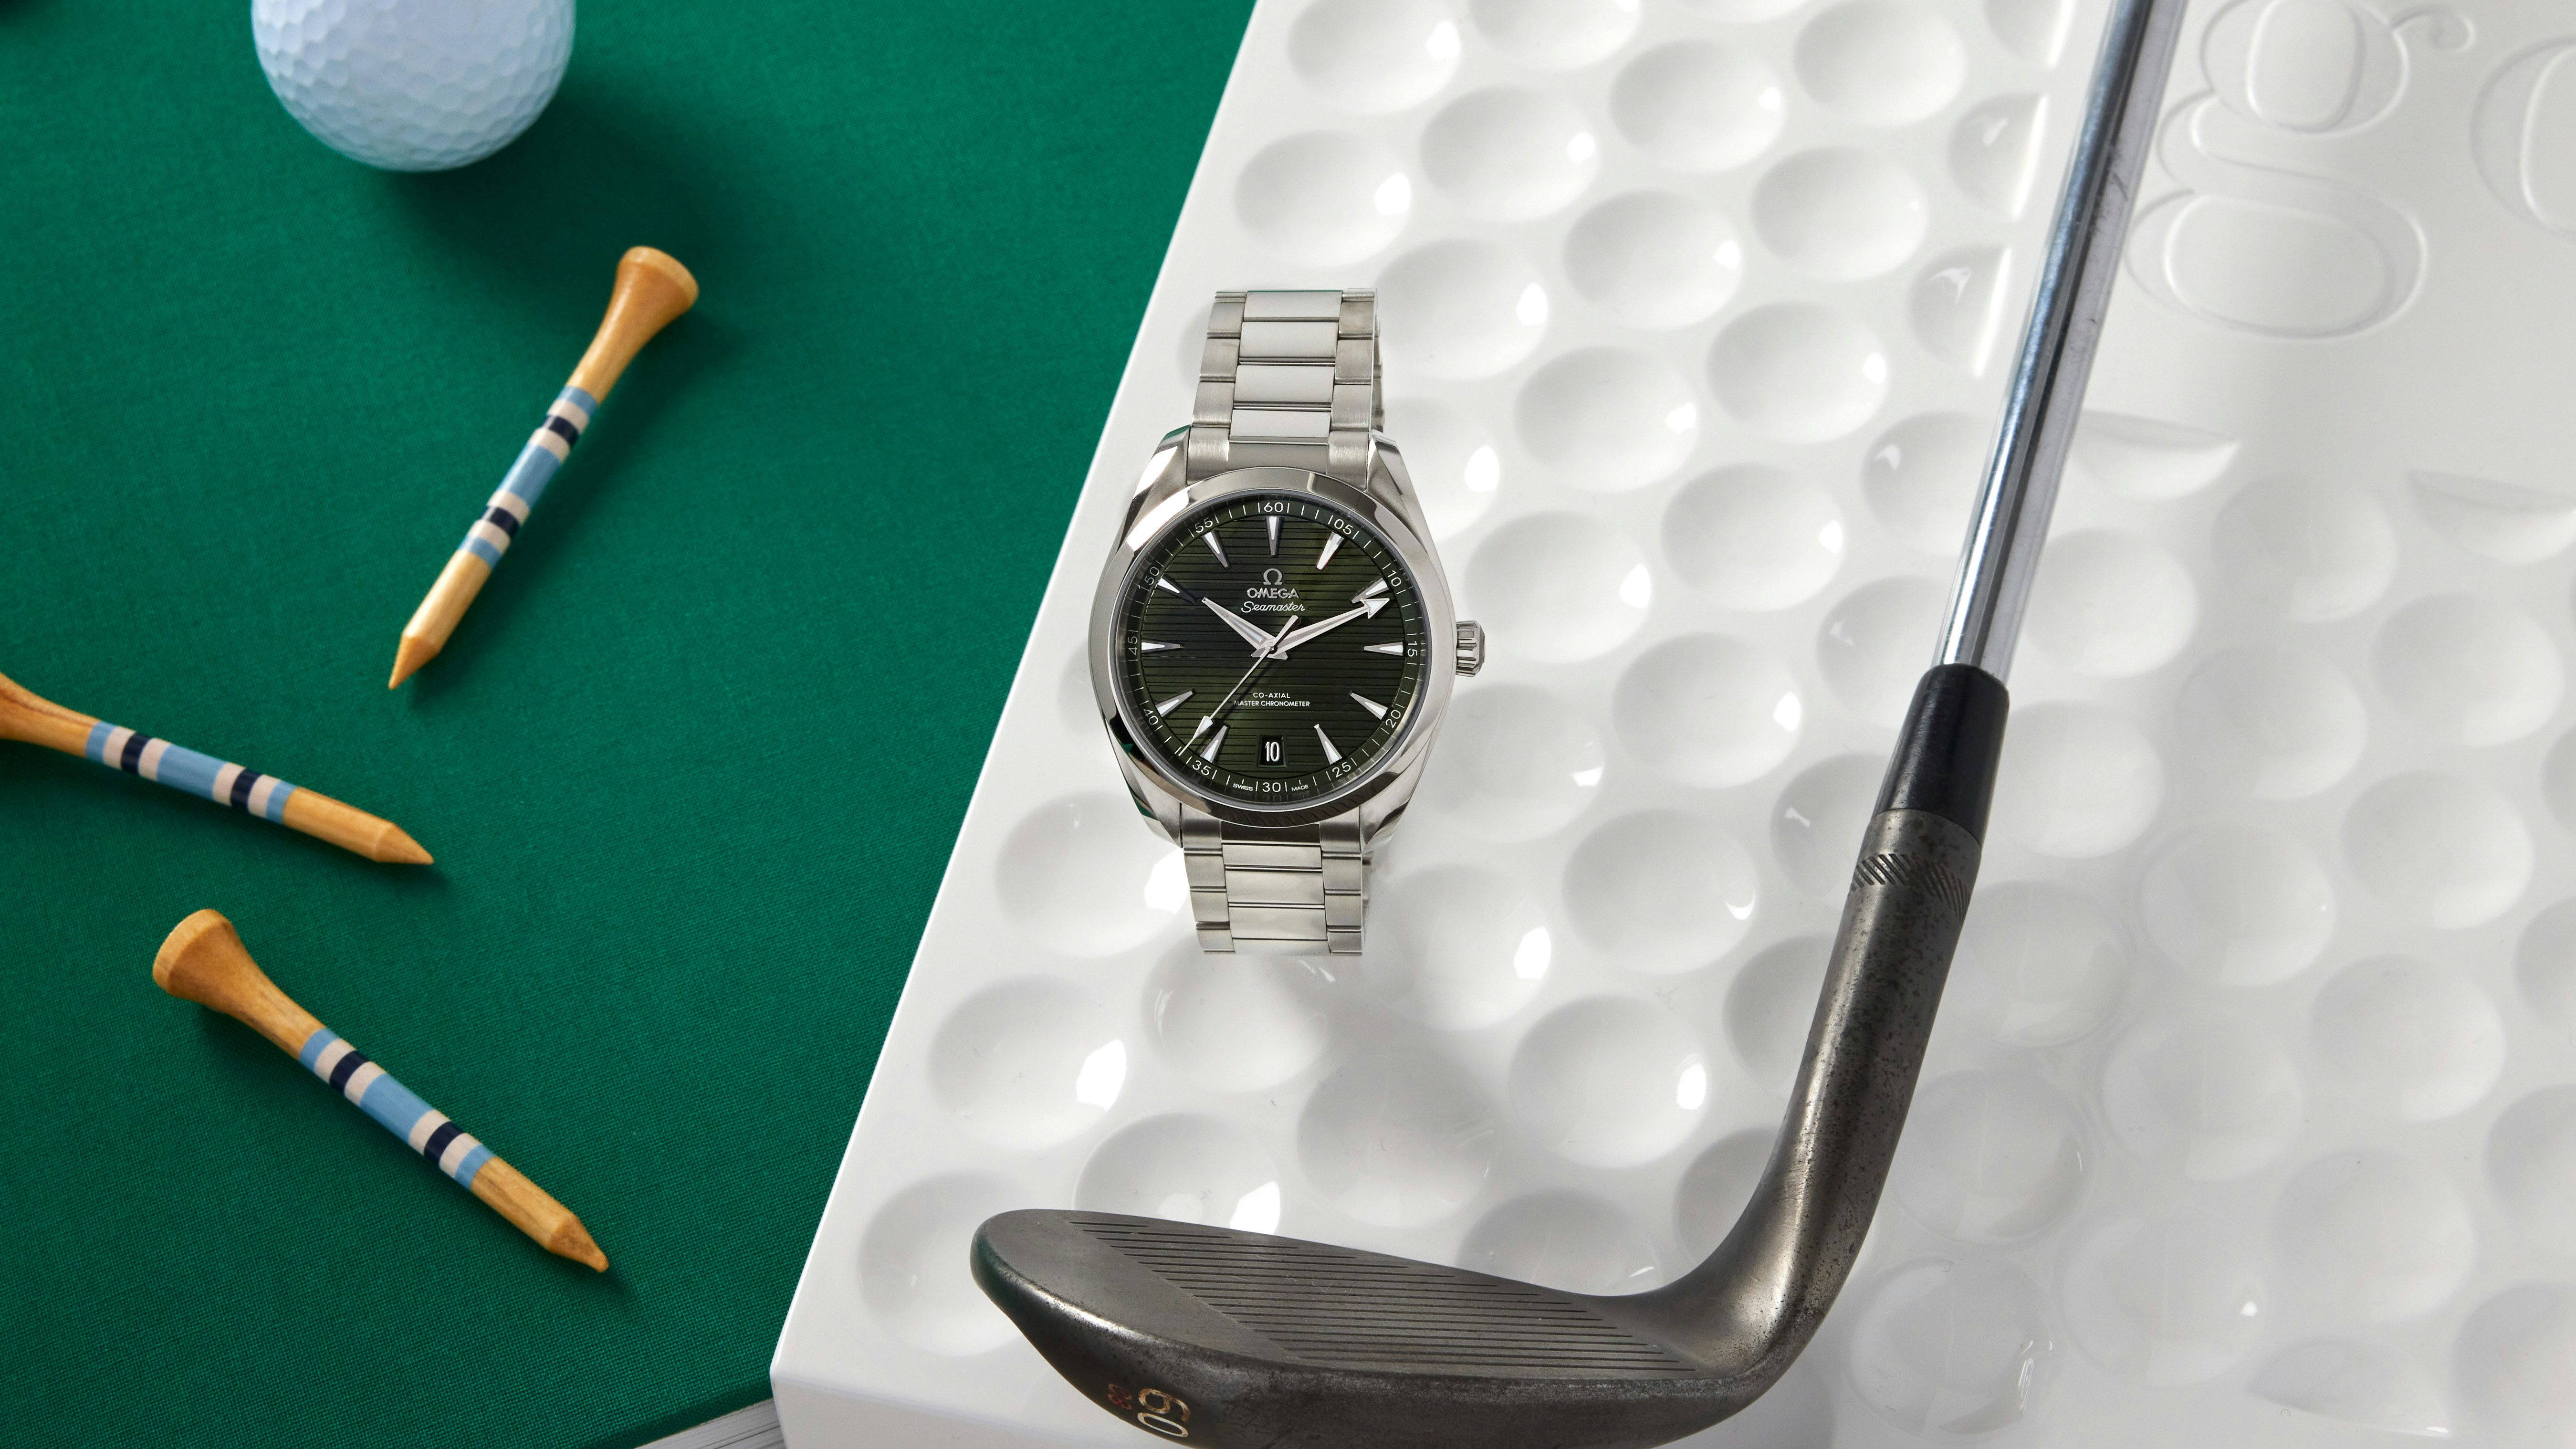 The HODINKEE Golf Collection